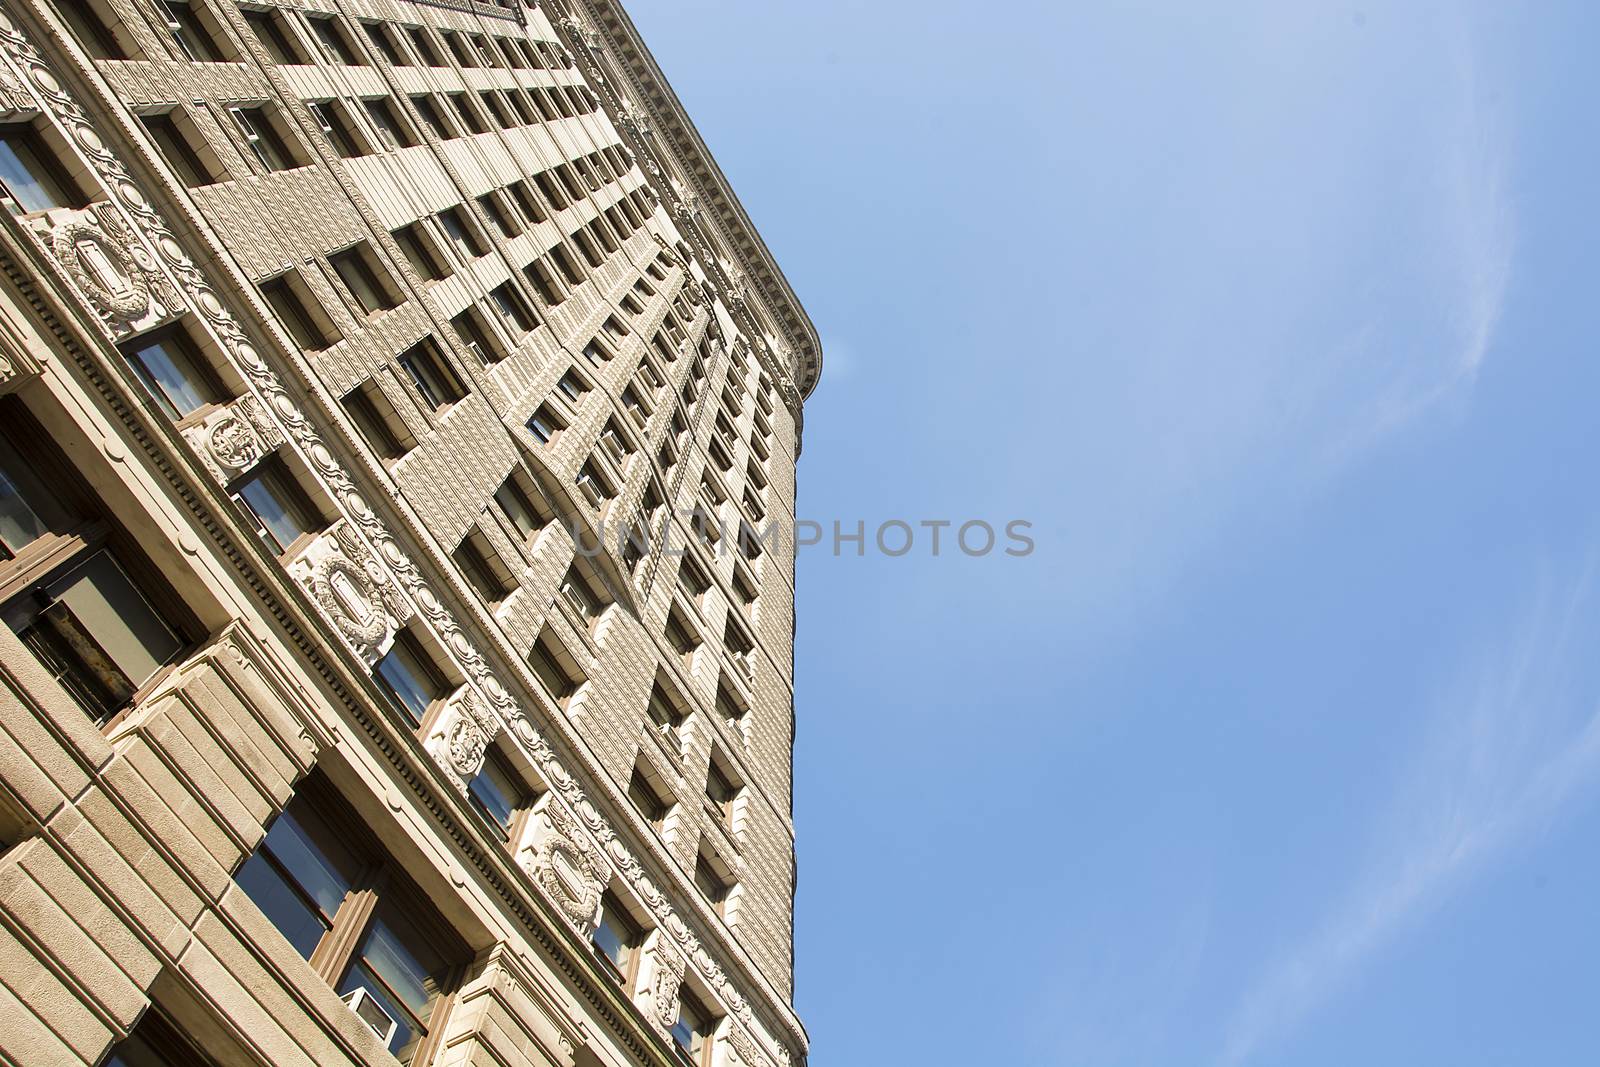 New York, USA, november 2016: Flat Iron building viewed from the bottom. Completed in 1902, it is considered to be one of the first skyscrapers ever built.